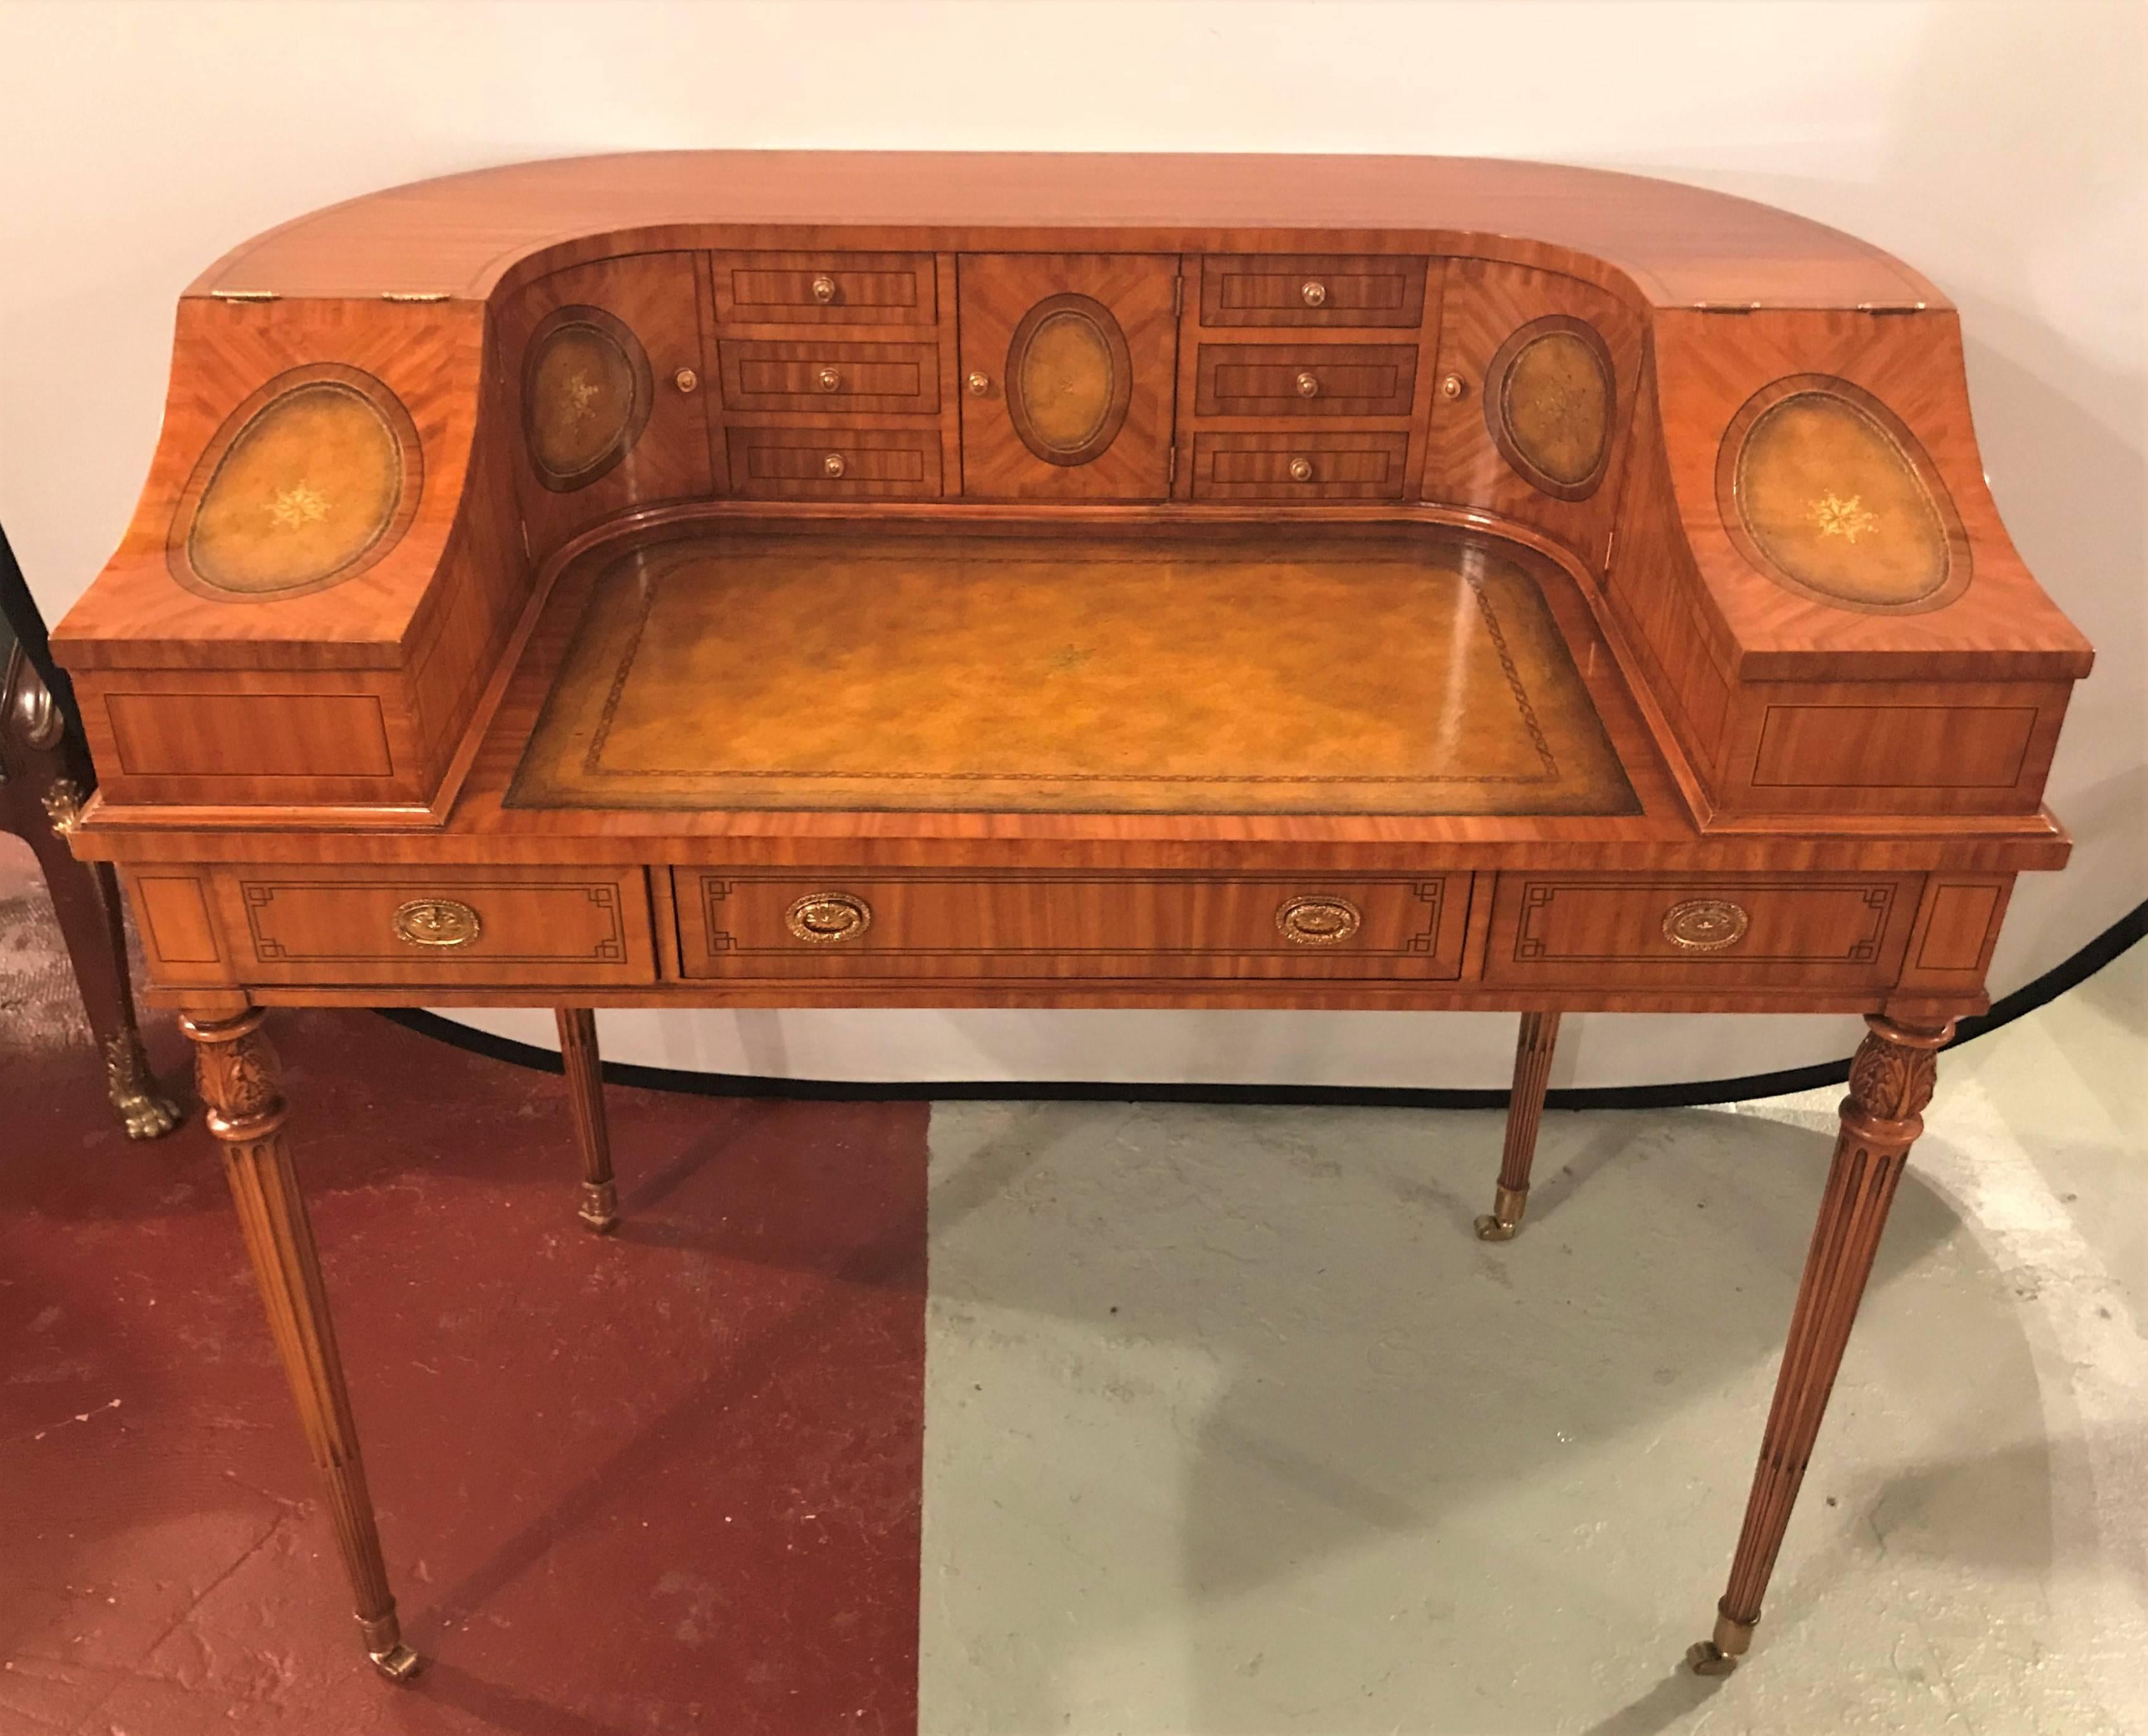 A fine satinwood Adams style Carlton house desk by Maitland-Smith. Finely crafted and well designed desk in the Kaufman style with tapering legs on bronze casters supporting an upper case of three drawers and a Carlton House compartmental set up on